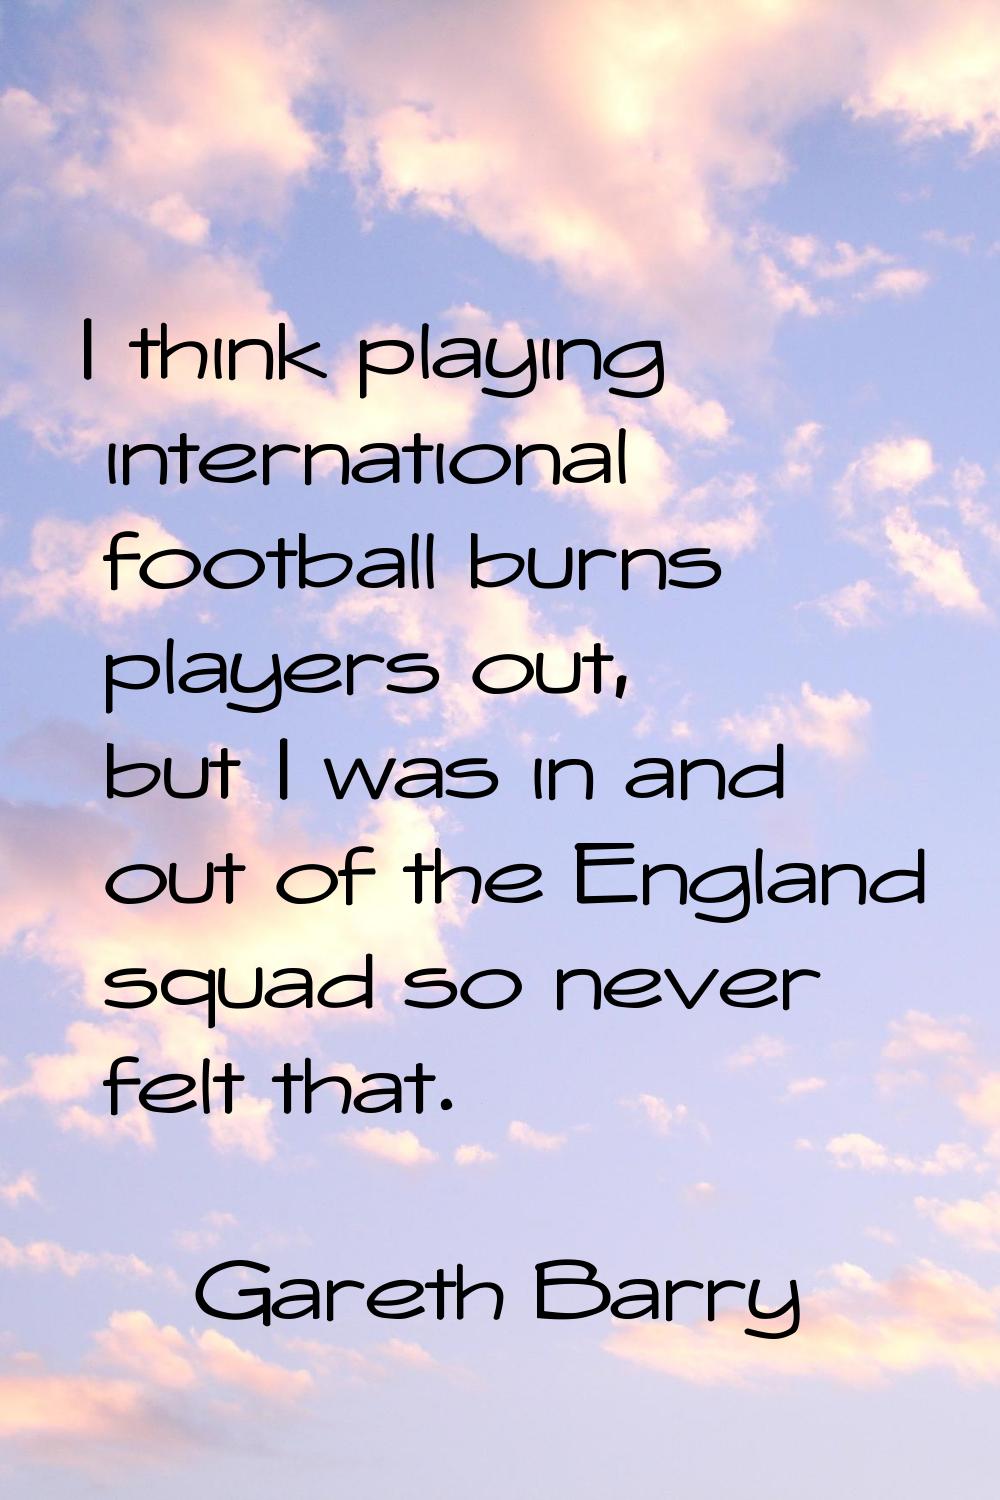 I think playing international football burns players out, but I was in and out of the England squad